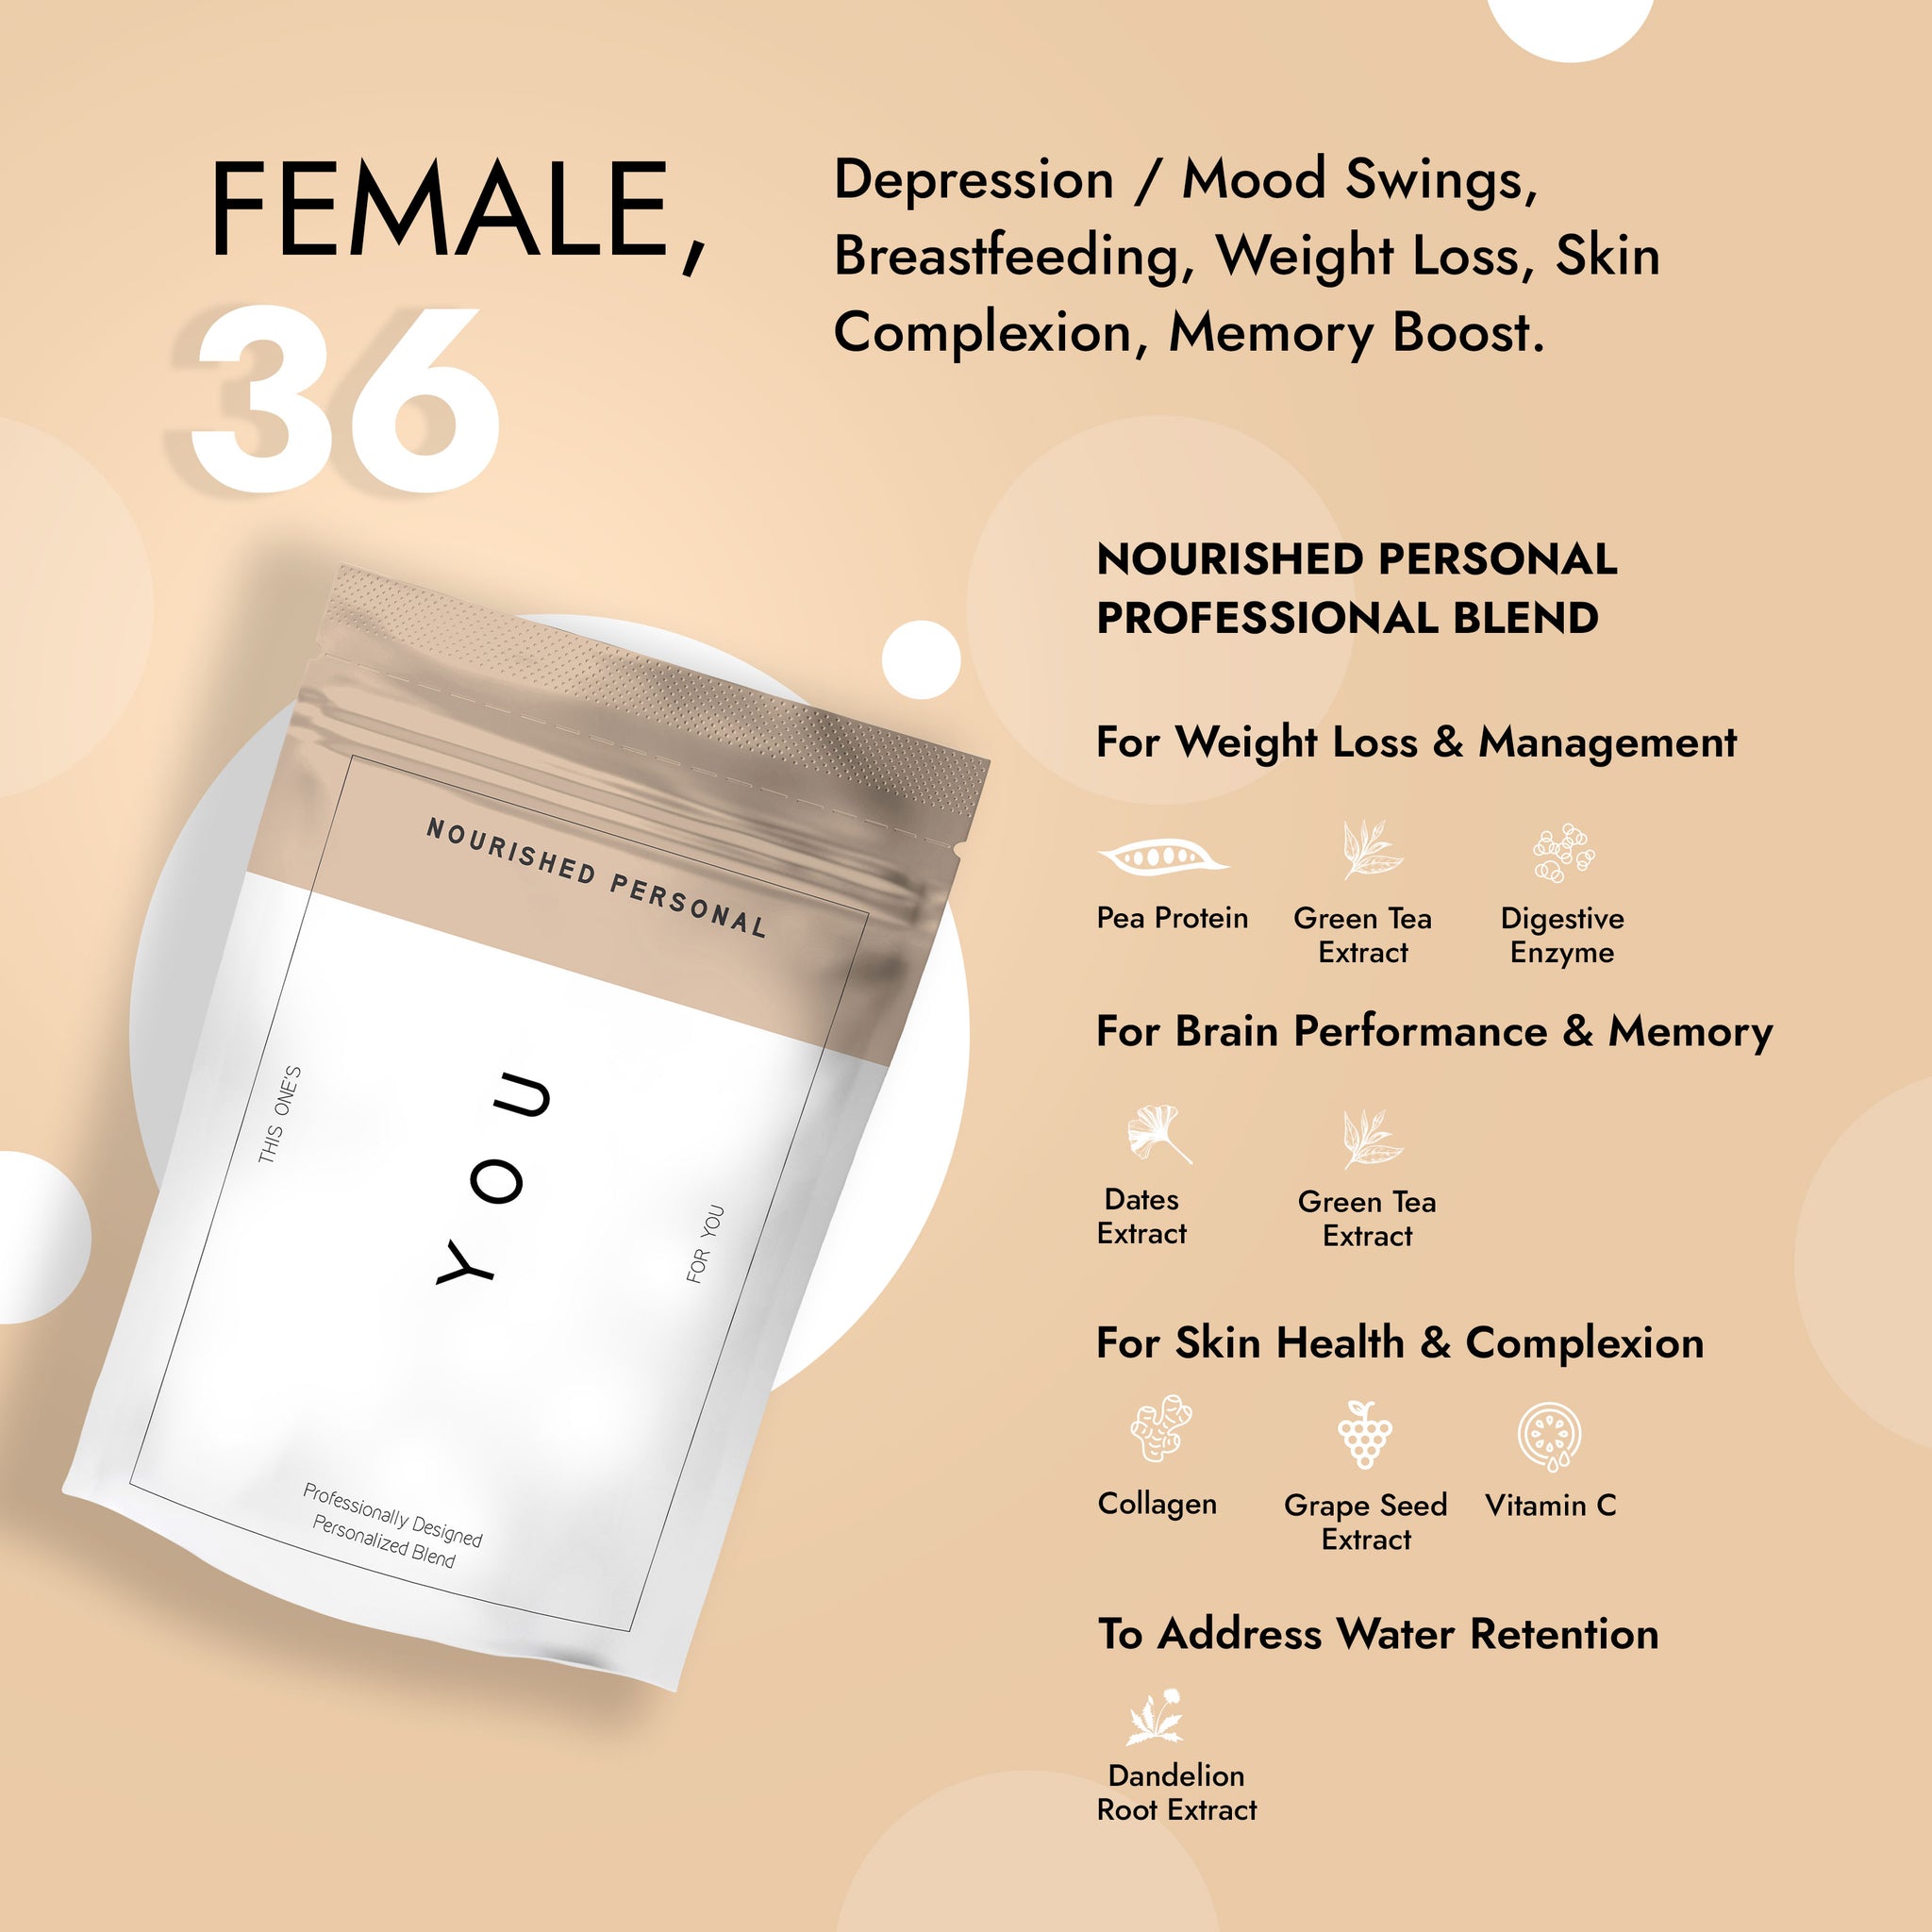 Case Study 50: Female, 36 - Depression / Mood Swings, Breastfeeding, Weight Loss, Skin Complexion, Memory Boost.